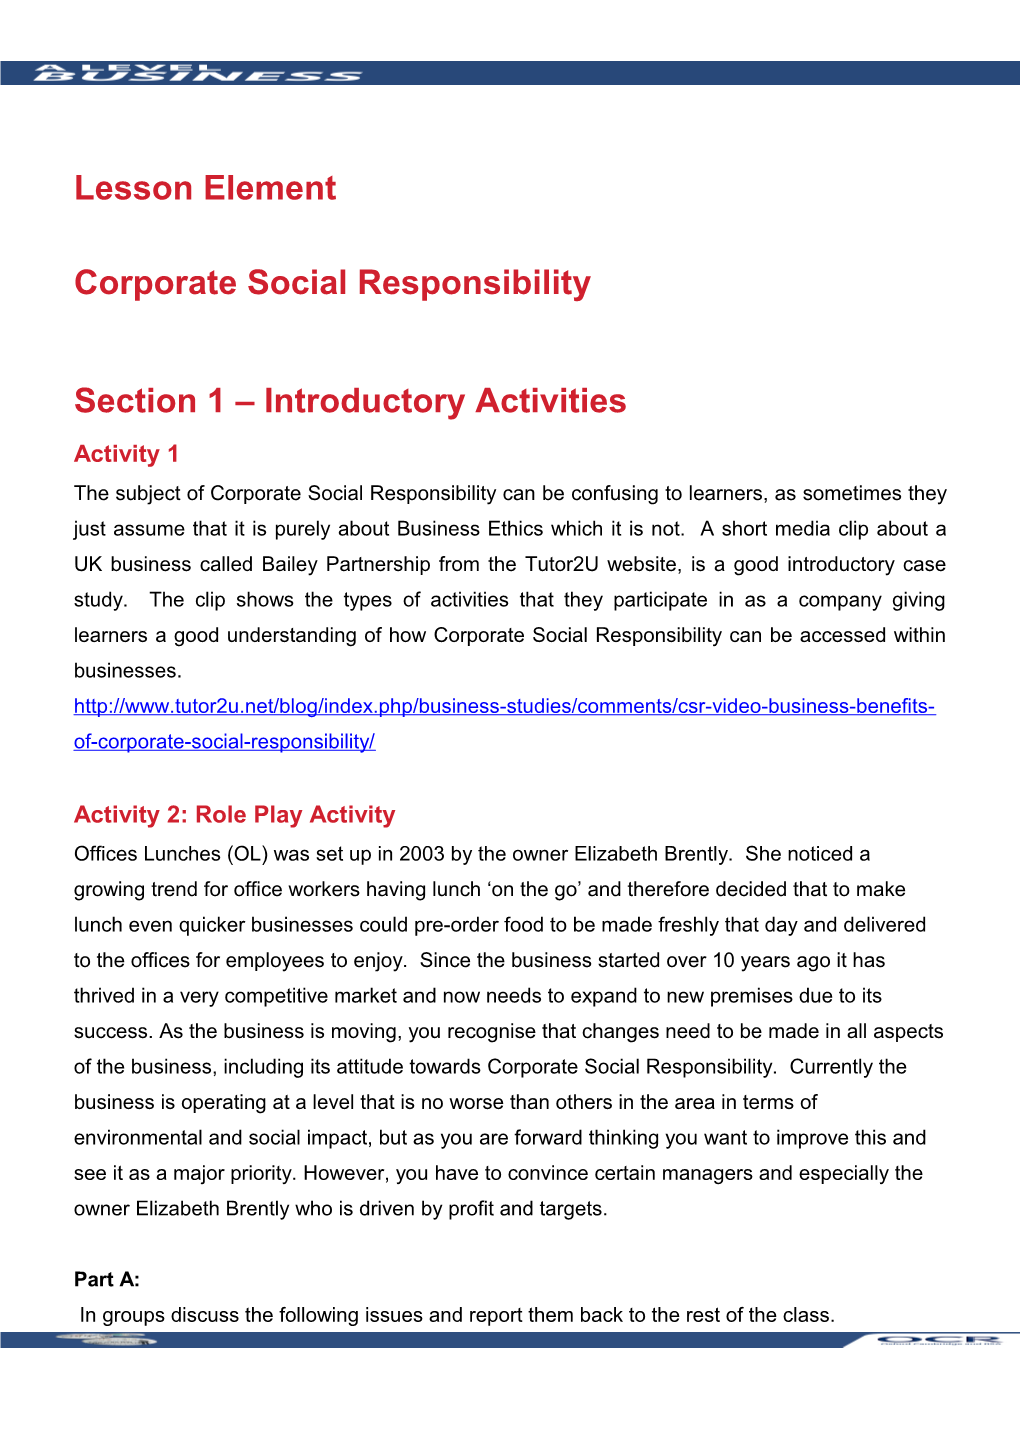 A Level Business Topic Exploration Pack Learner Activity(Corporate Social Responsibility)